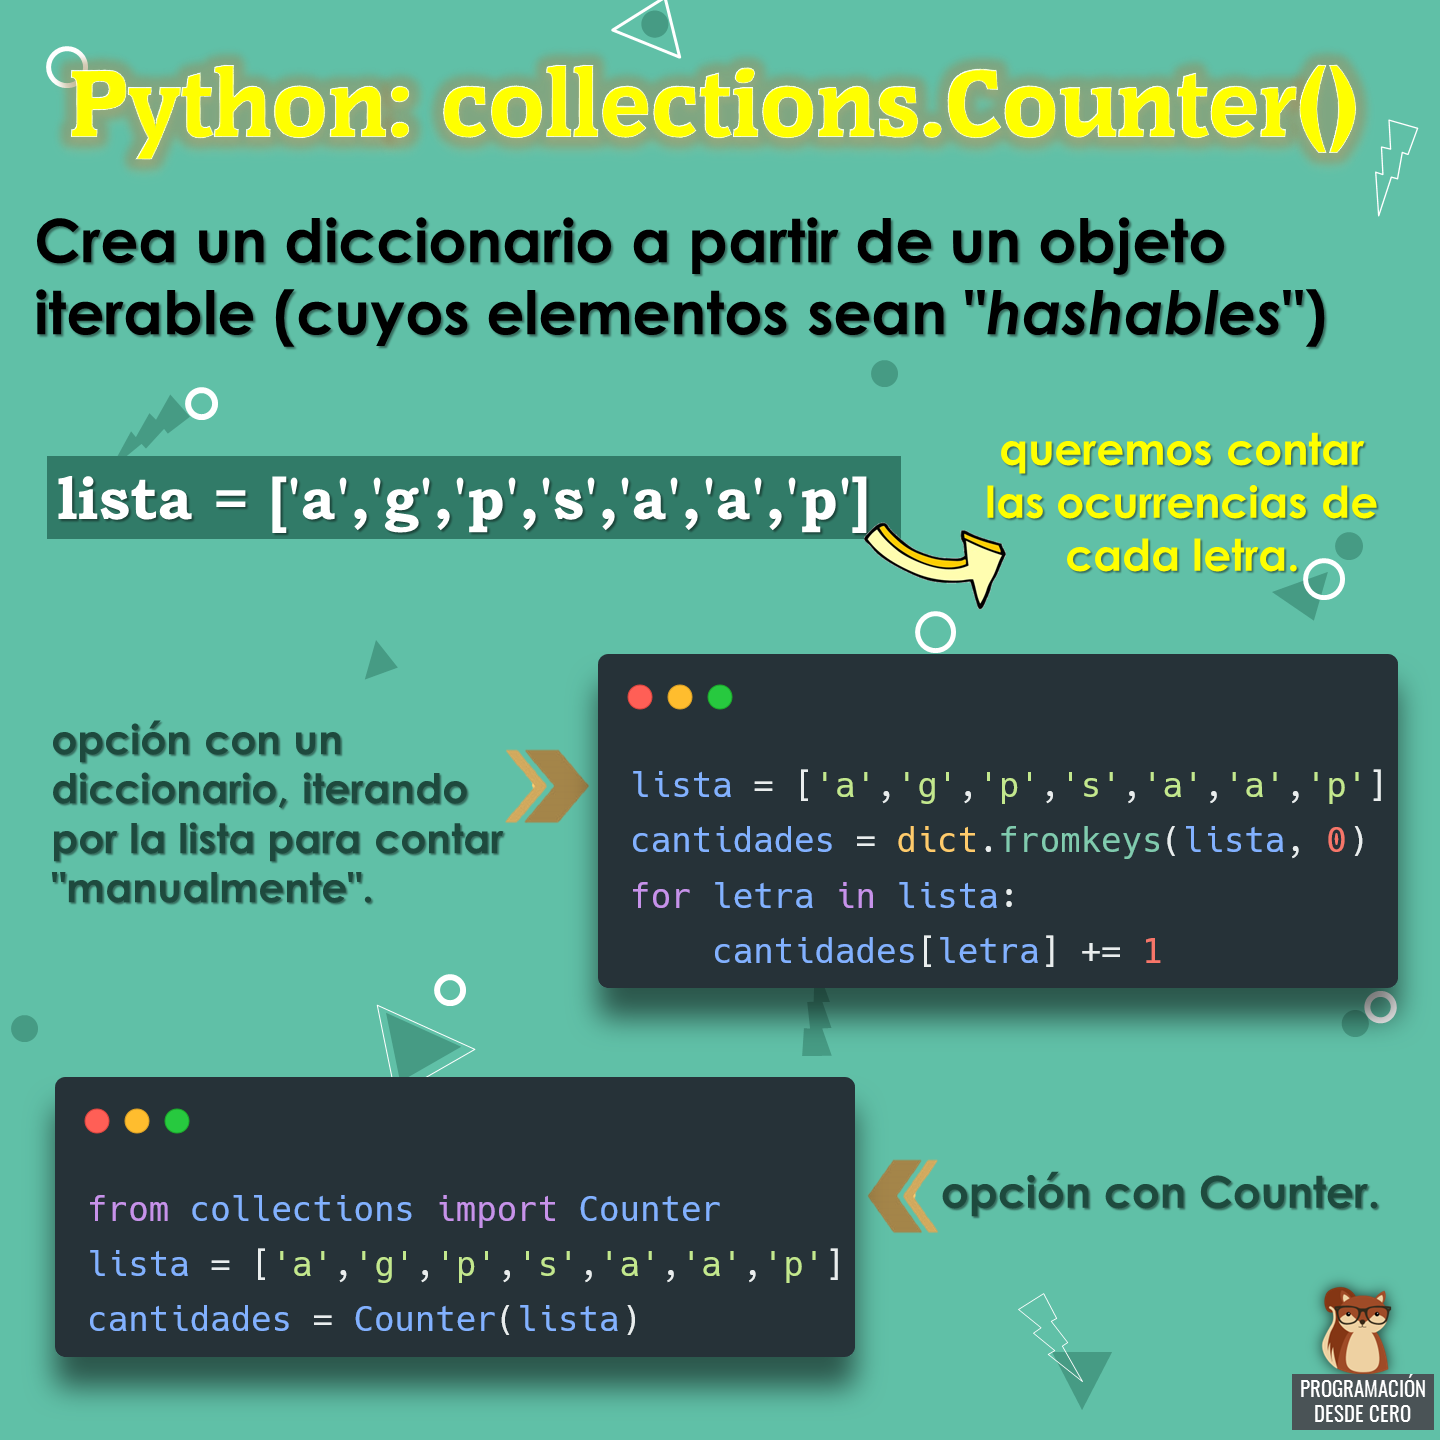 Python collections.Counter